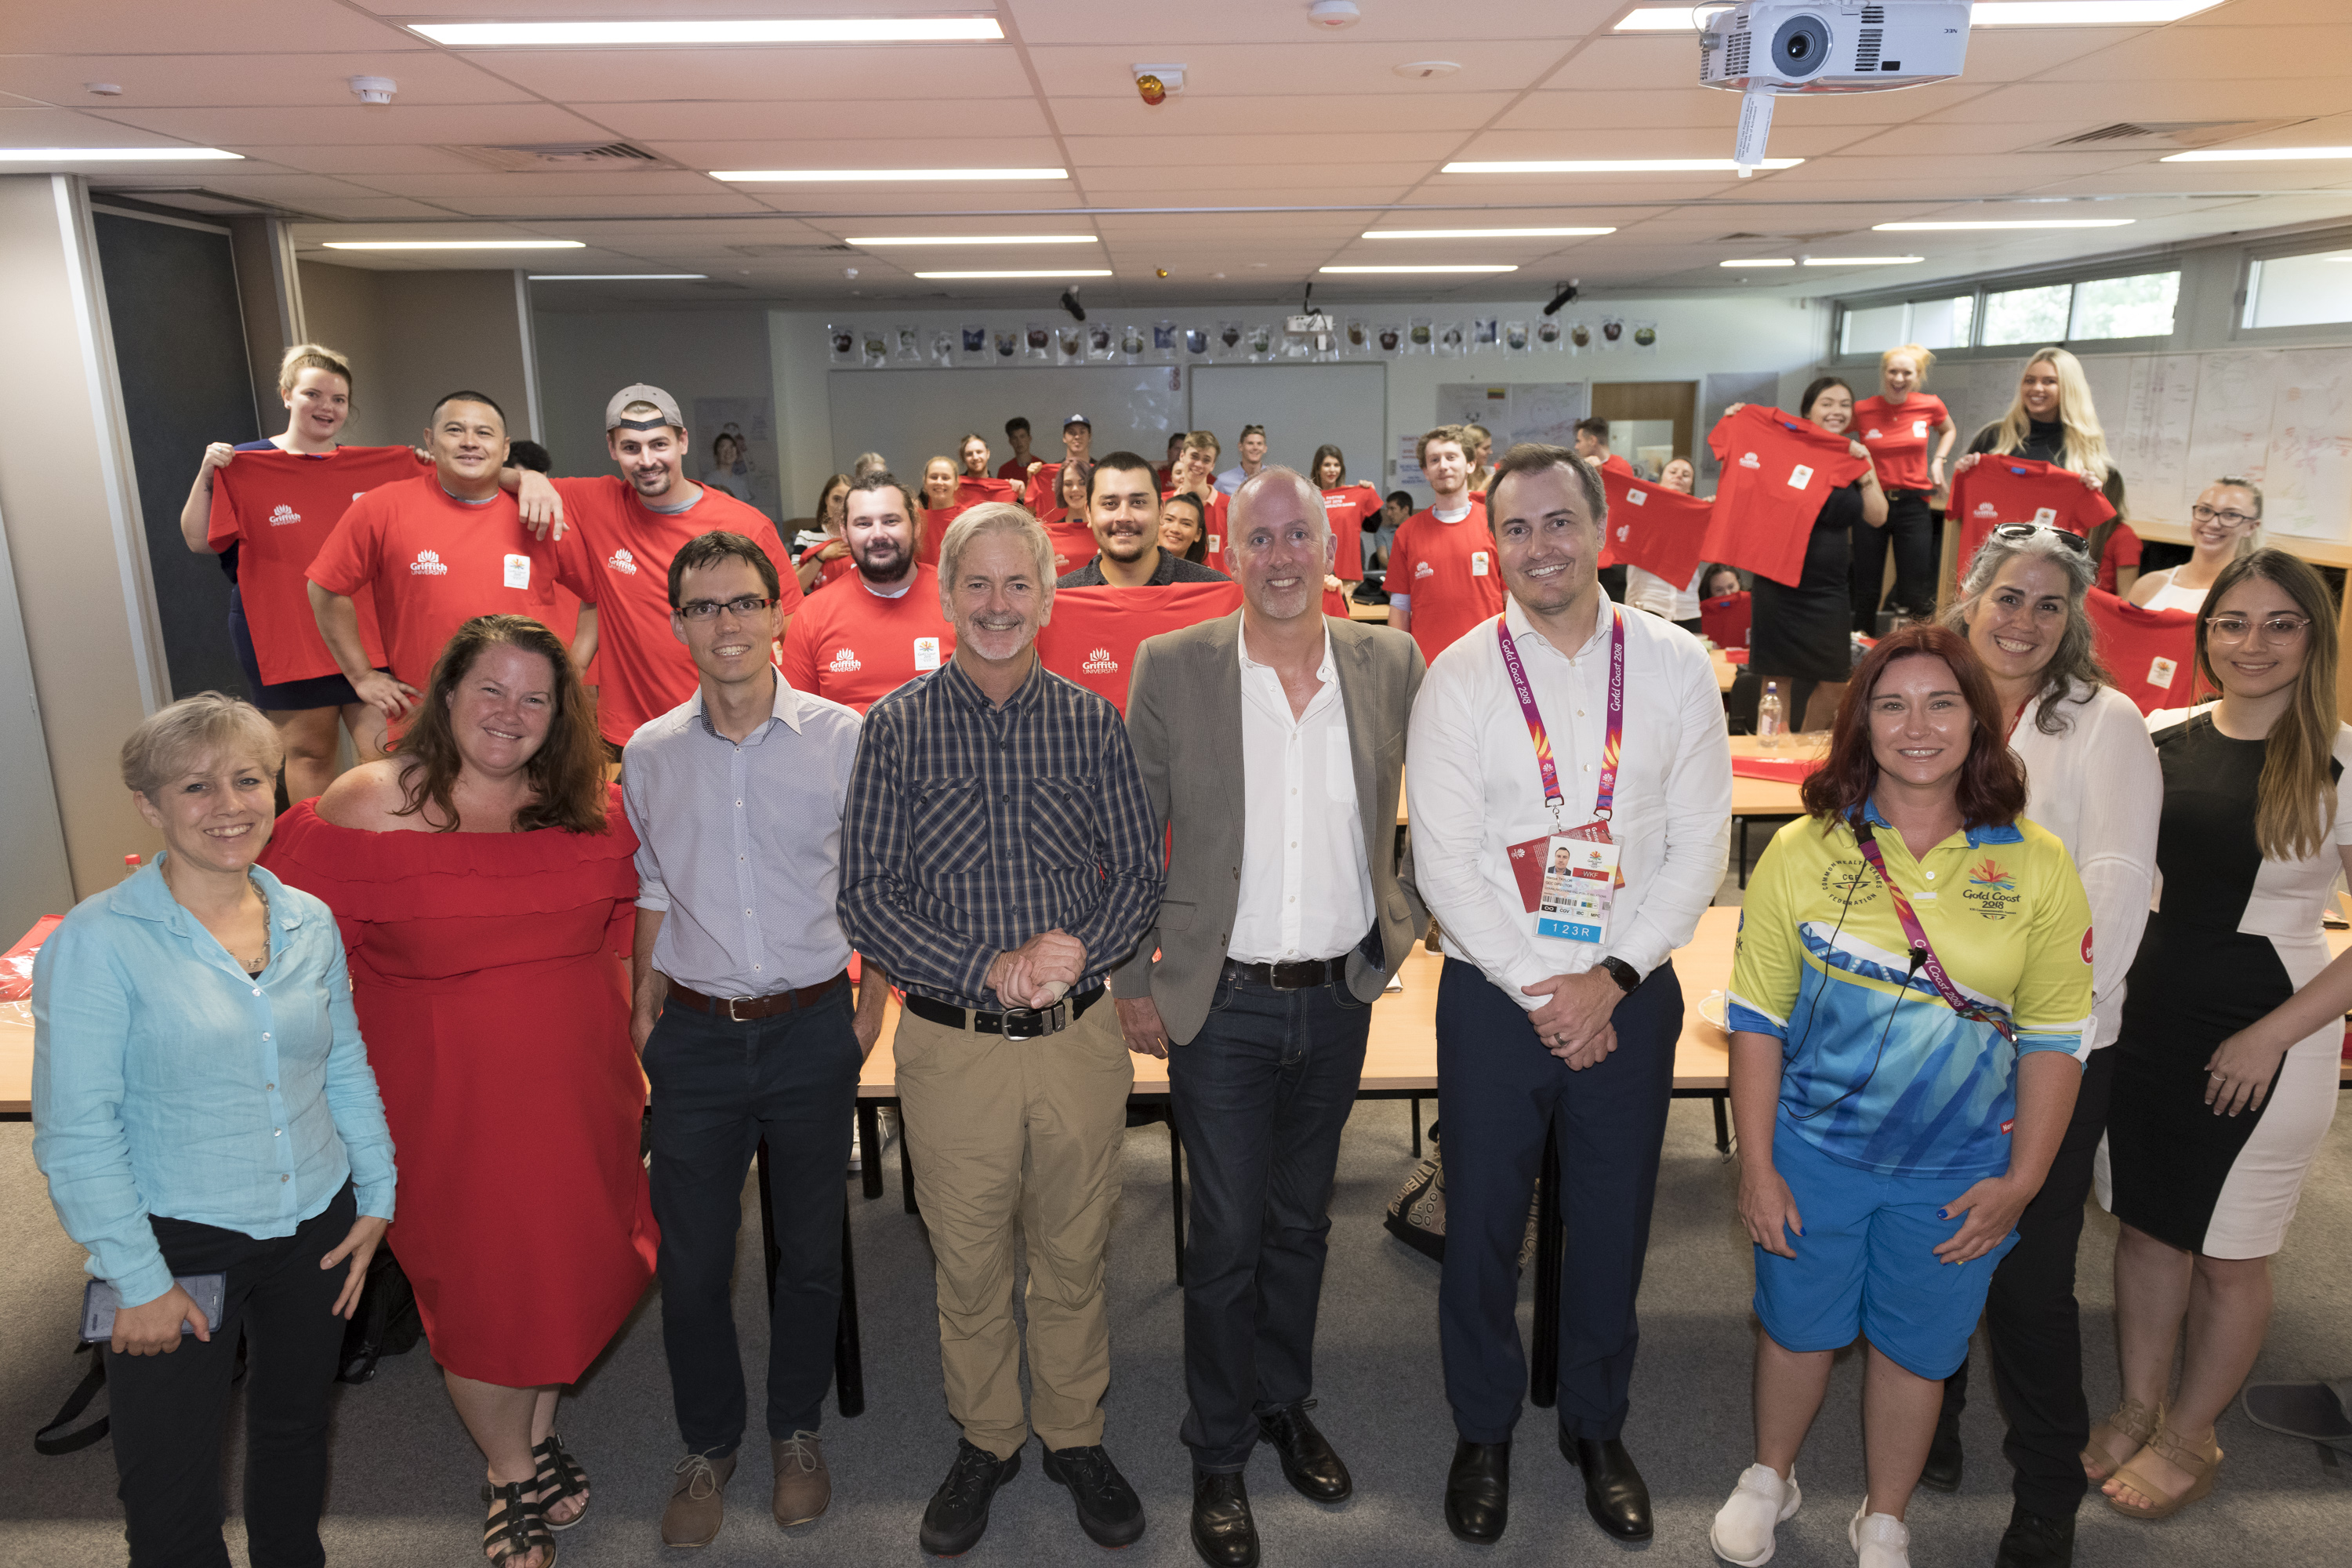 Back row: Griffith journalism students prepare for their GC2018 journalism experience. Front row from left; Virginia Balfour and Nance Haxton (Griffith), Conal Hanna (Fairfax), Professor Mark Pearson and Professor James Carson(Griffith), Marcus Taylor (GOLDOC), Megan Walker (2018 Commonwealth Games International Zone Manager), Faith Valencia-Forrester and Audrey Courty (Griffith).